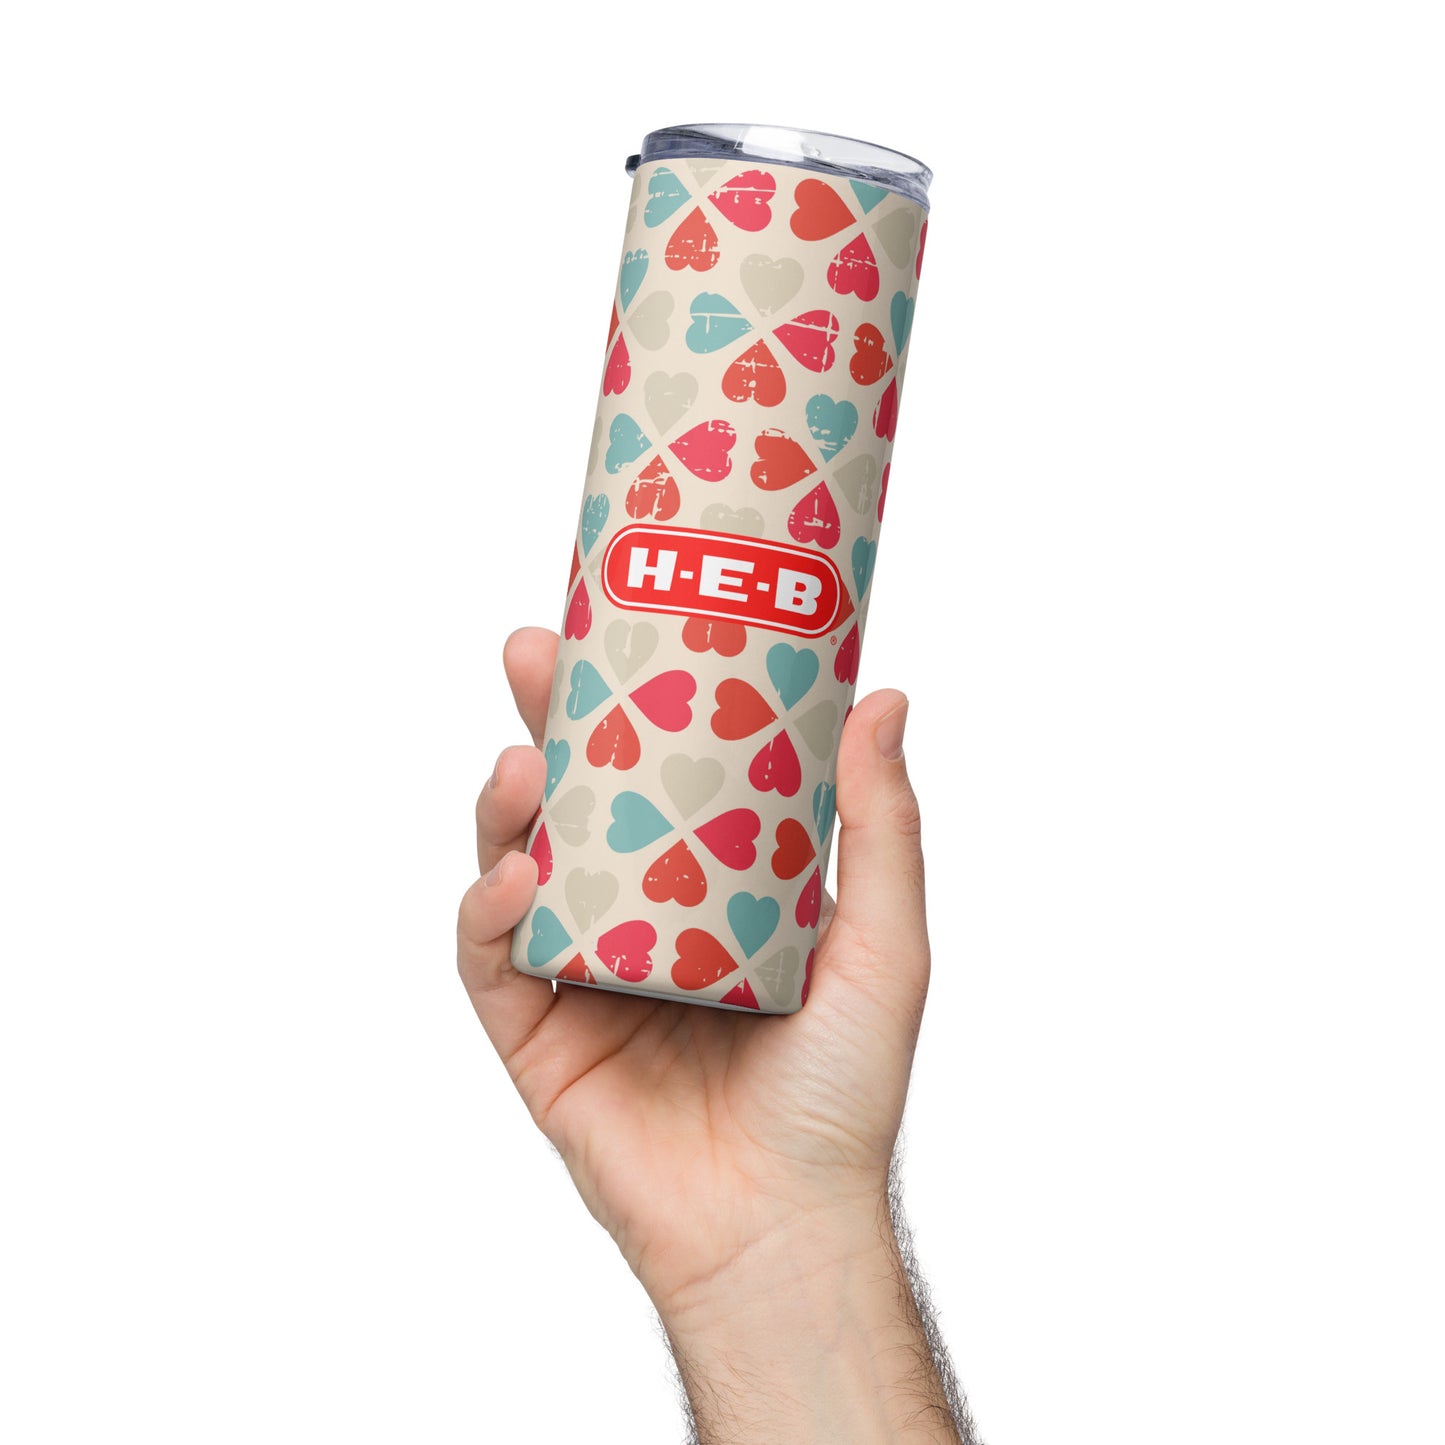 HEB Hearts Stainless steel tumbler CedarHill Country Market